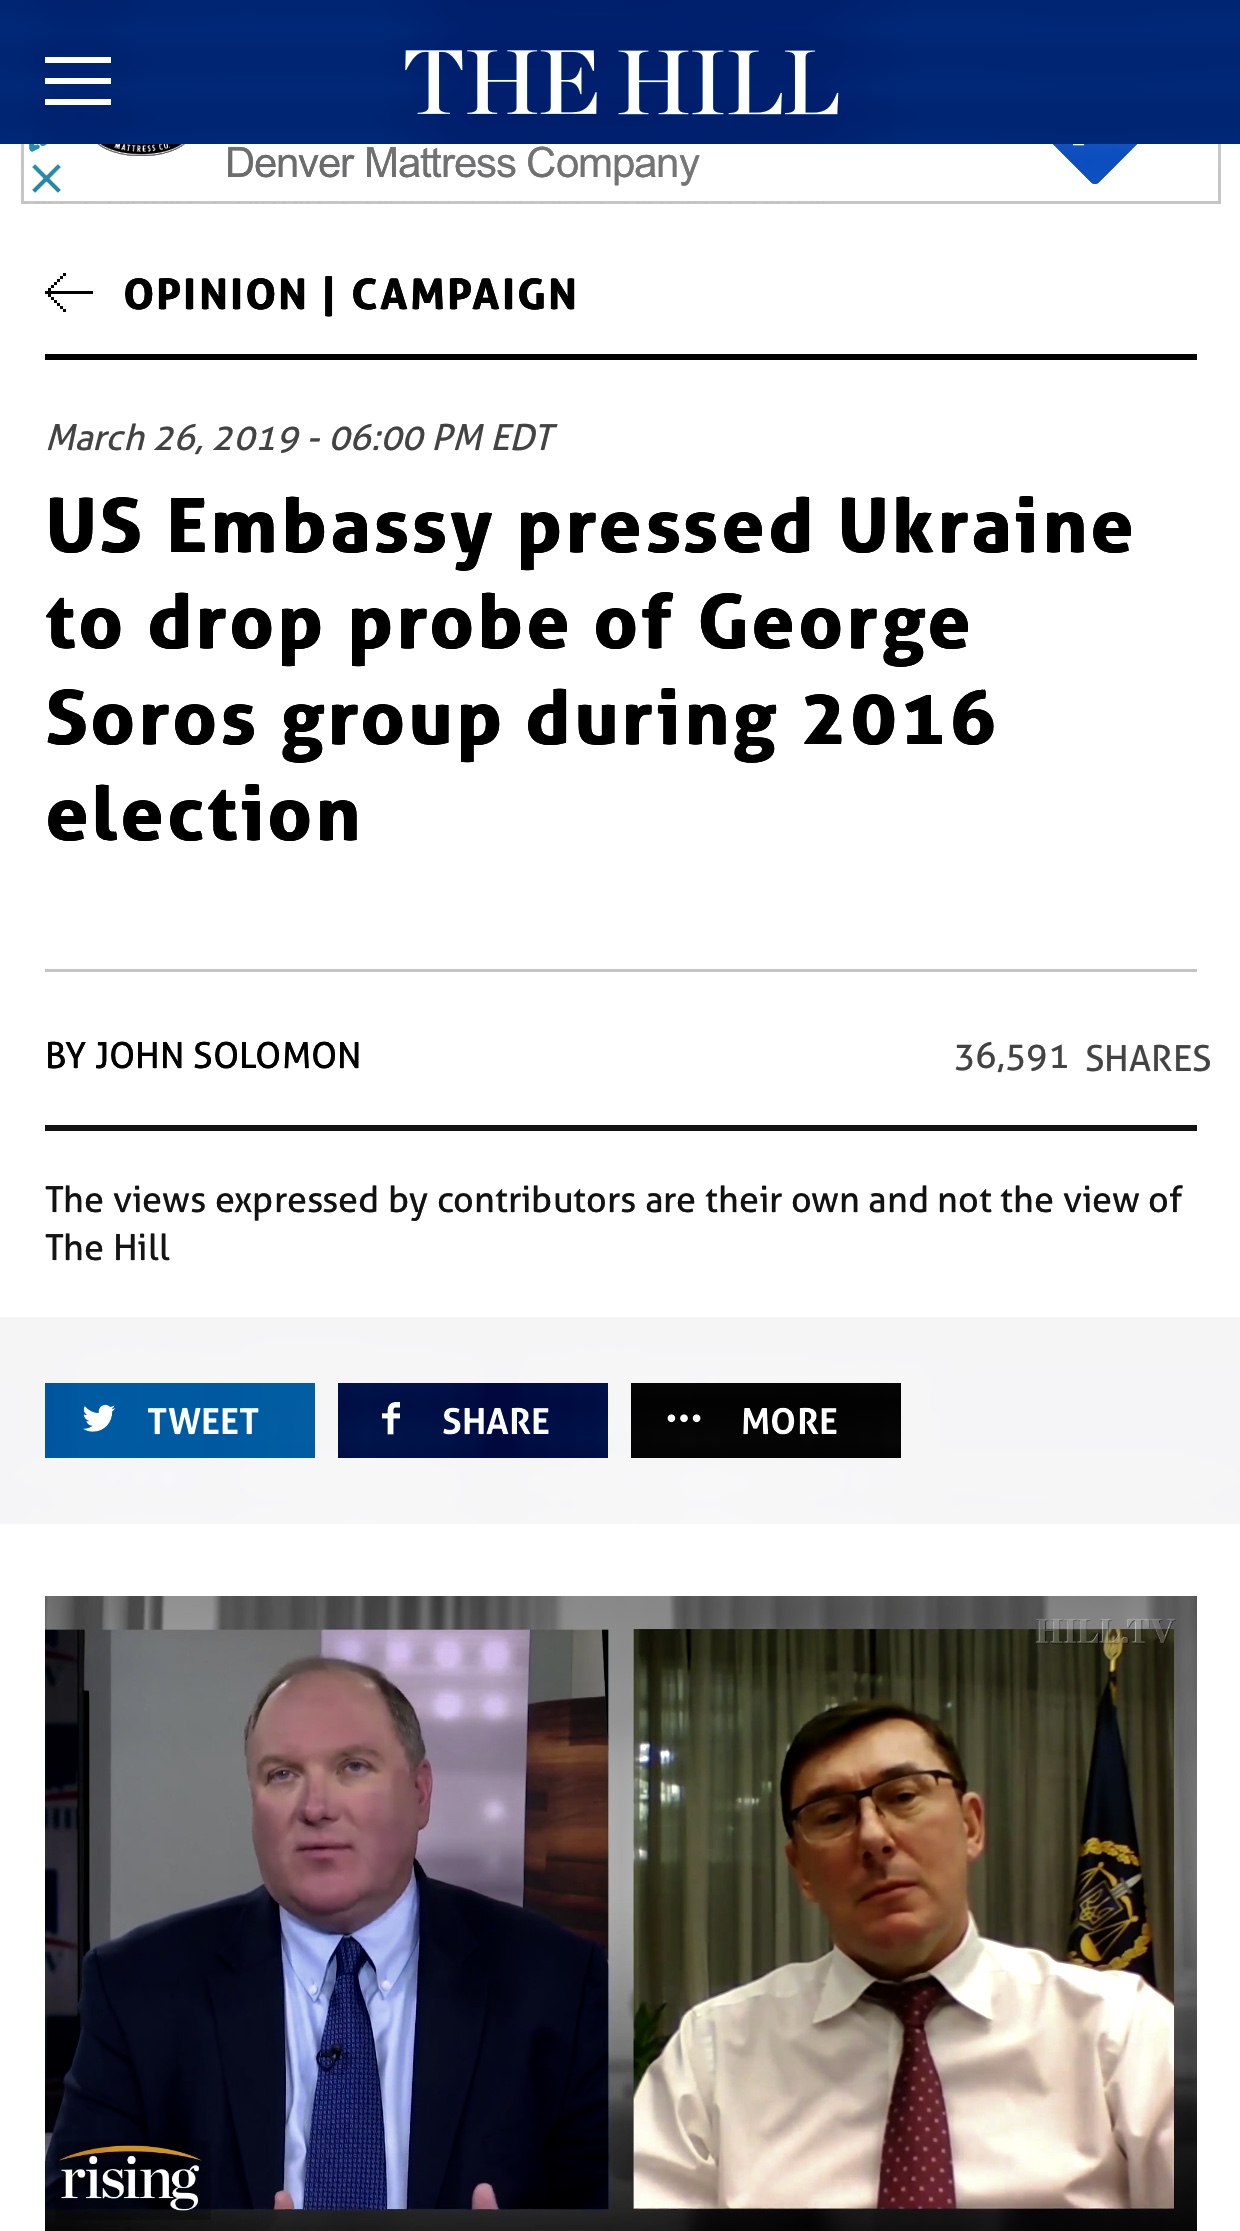 US Embassy pressed Ukraine to drop probe of George Soros group during 2016 election | TheHill